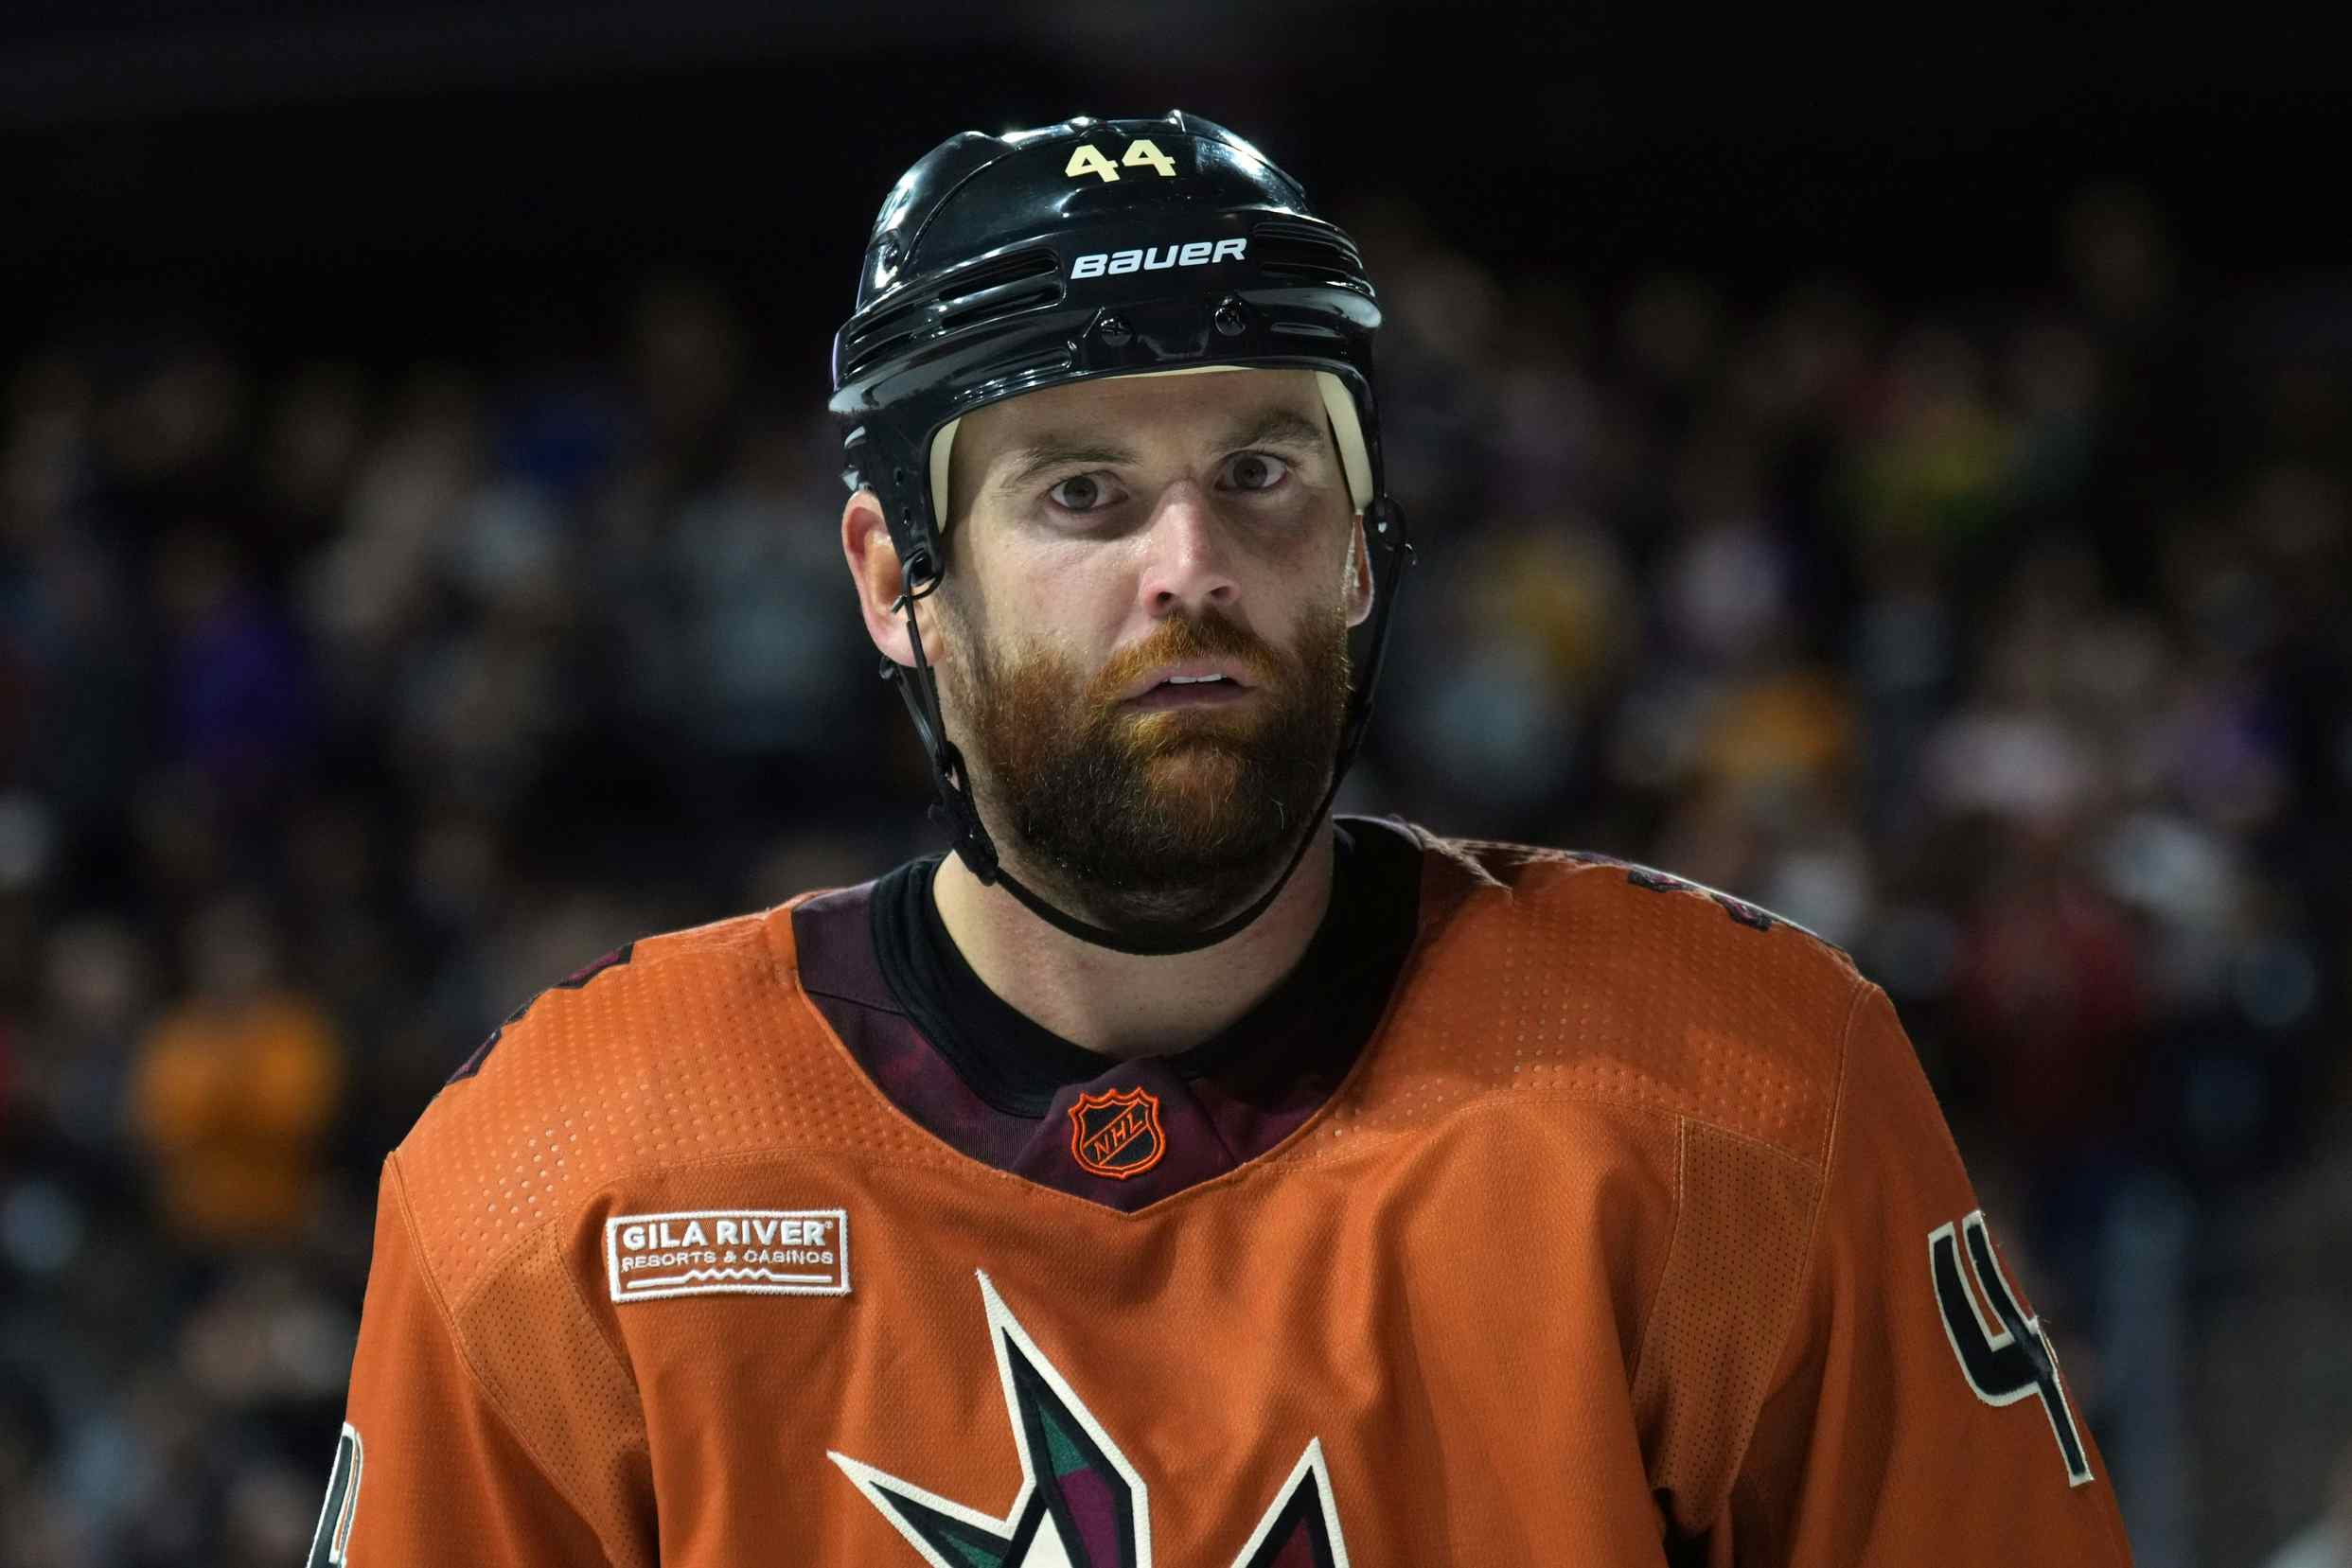 Oilers trade Zack Kassian and No. 29 pick to Coyotes for No. 32 pick